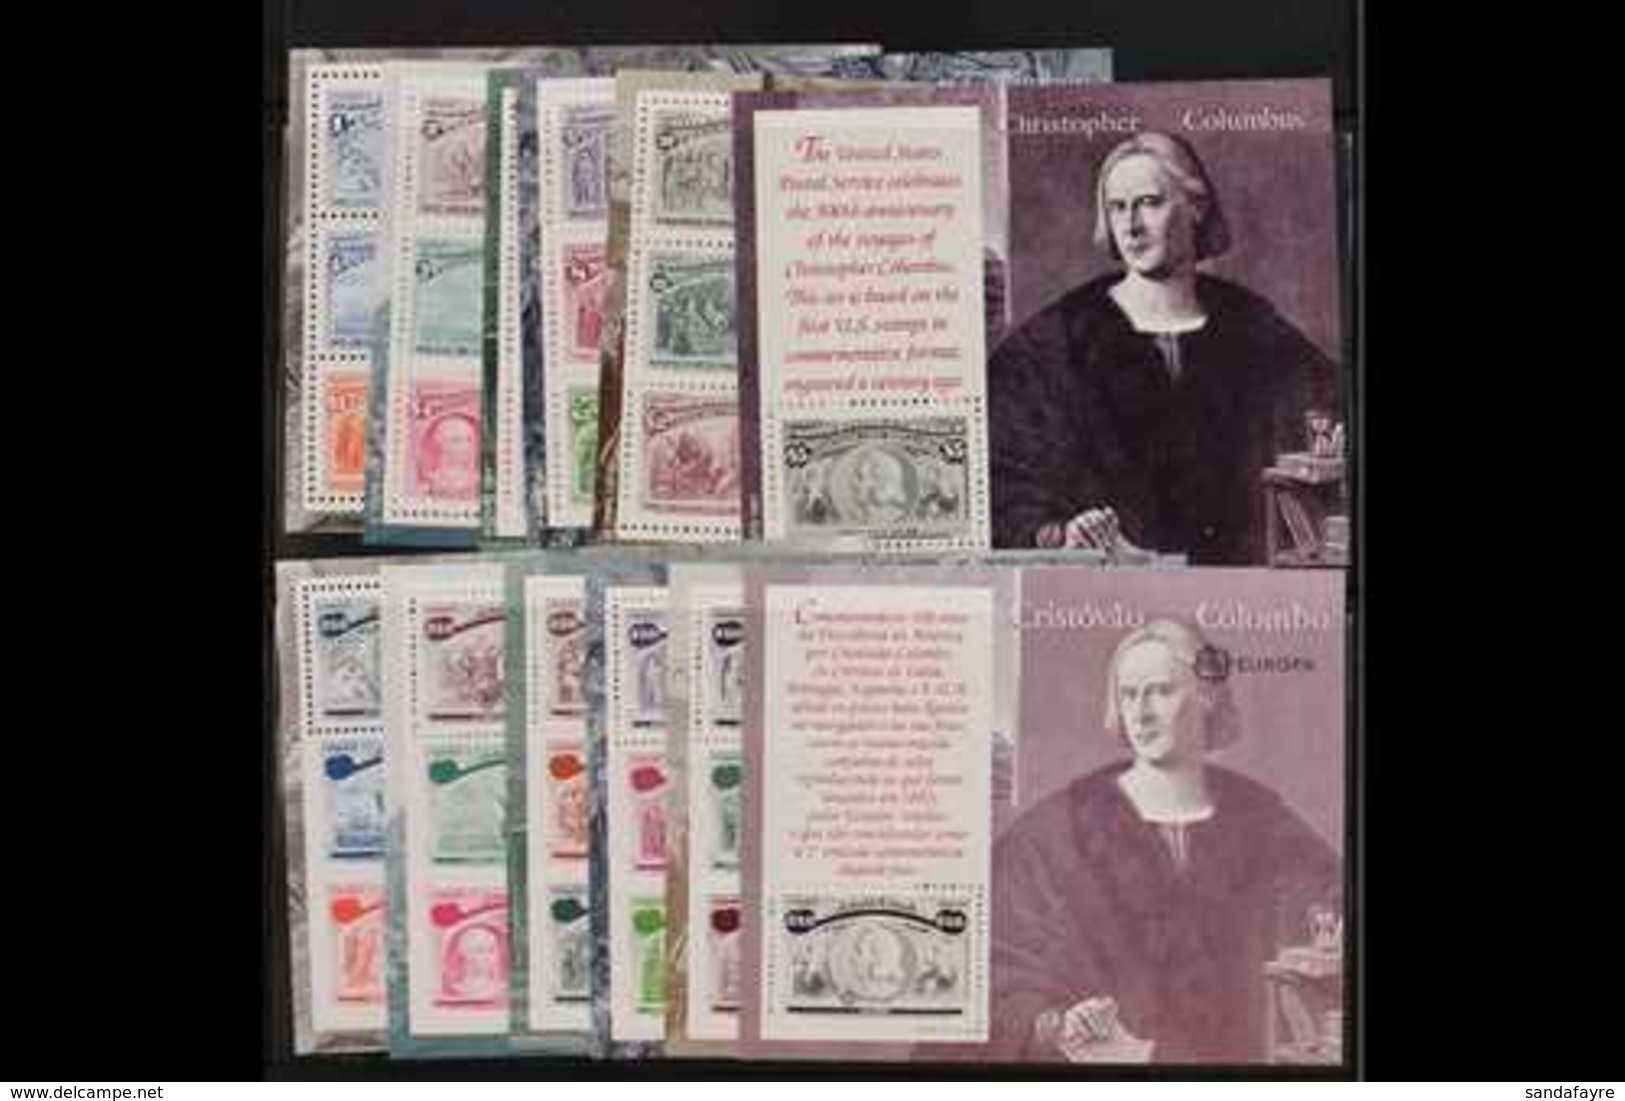 COLUMBUS OMNIBUS ISSUES 1992 USA, Italy, Portugal And Spain Miniature Sheets Complete Sets, Never Hinged Mint, Fresh. (2 - Ohne Zuordnung